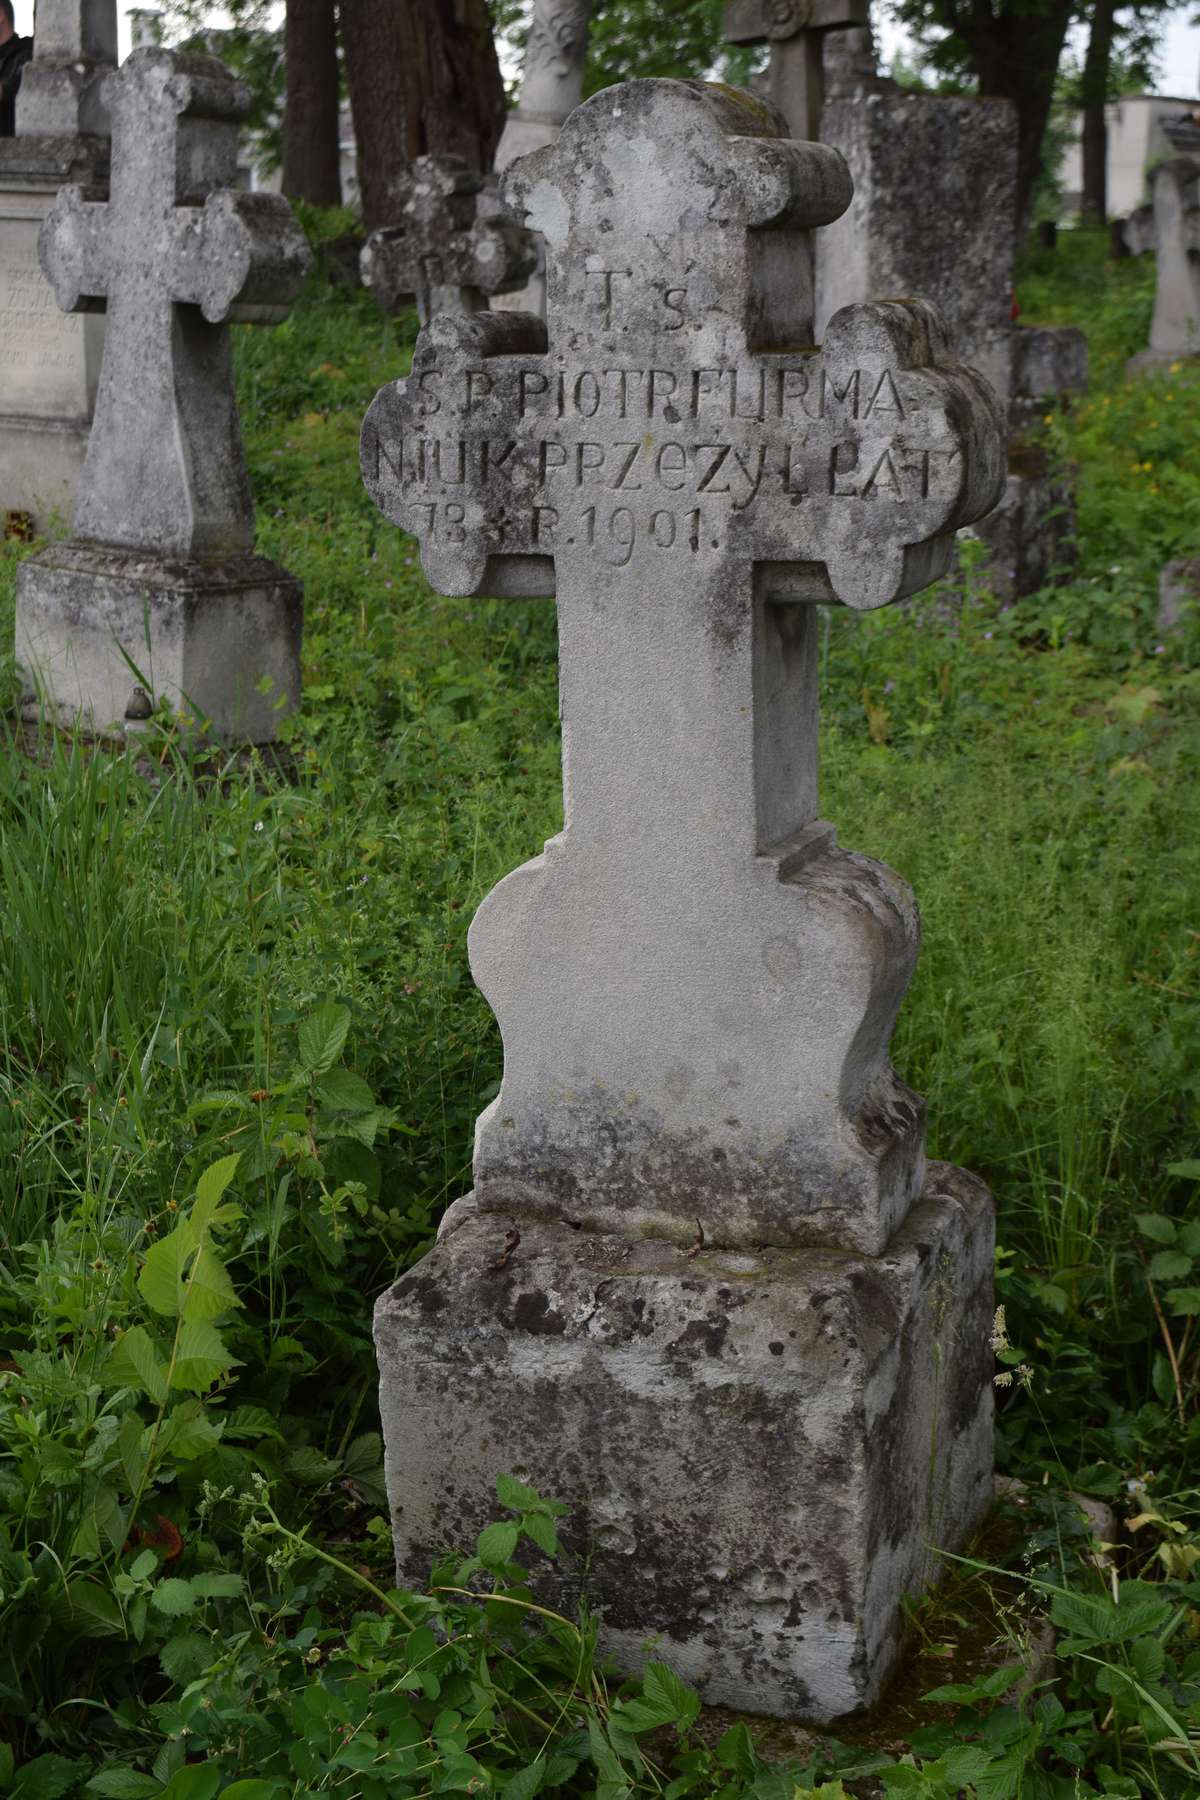 Tombstone of Piotr Furmaniuk, Zbarazh cemetery, state of 2018